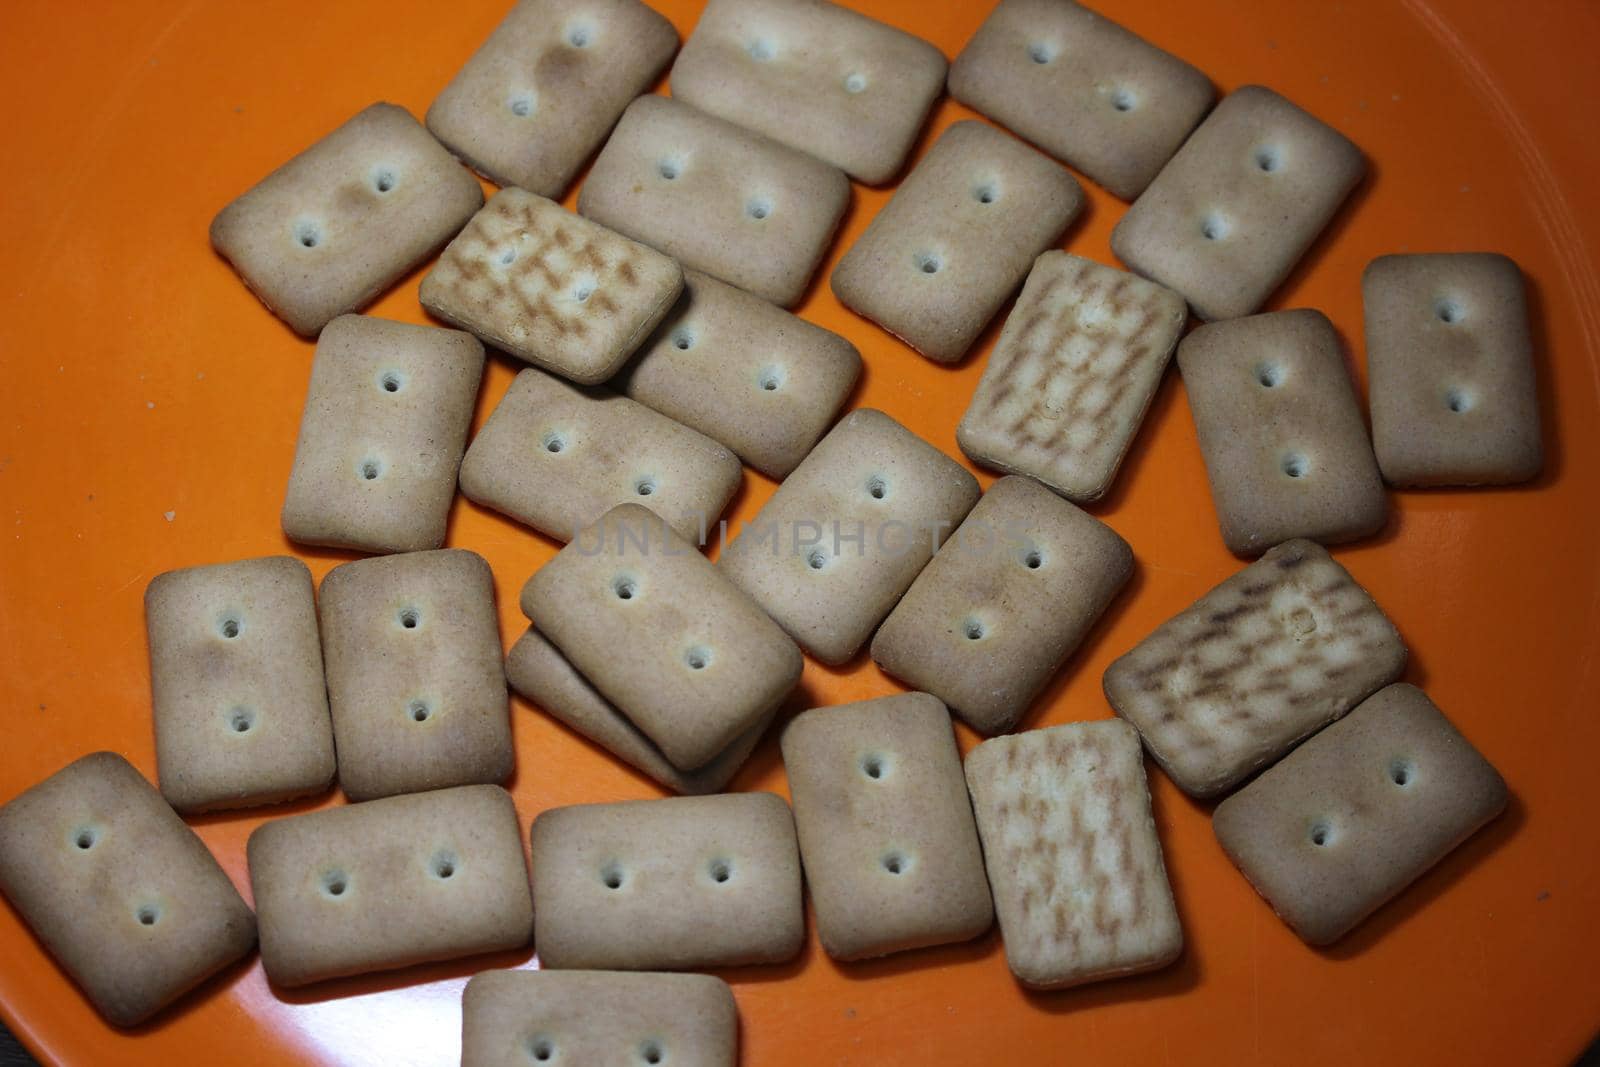 Close up top view of of biscuit cookies. Many rectangular biscuits with small pores in red plate